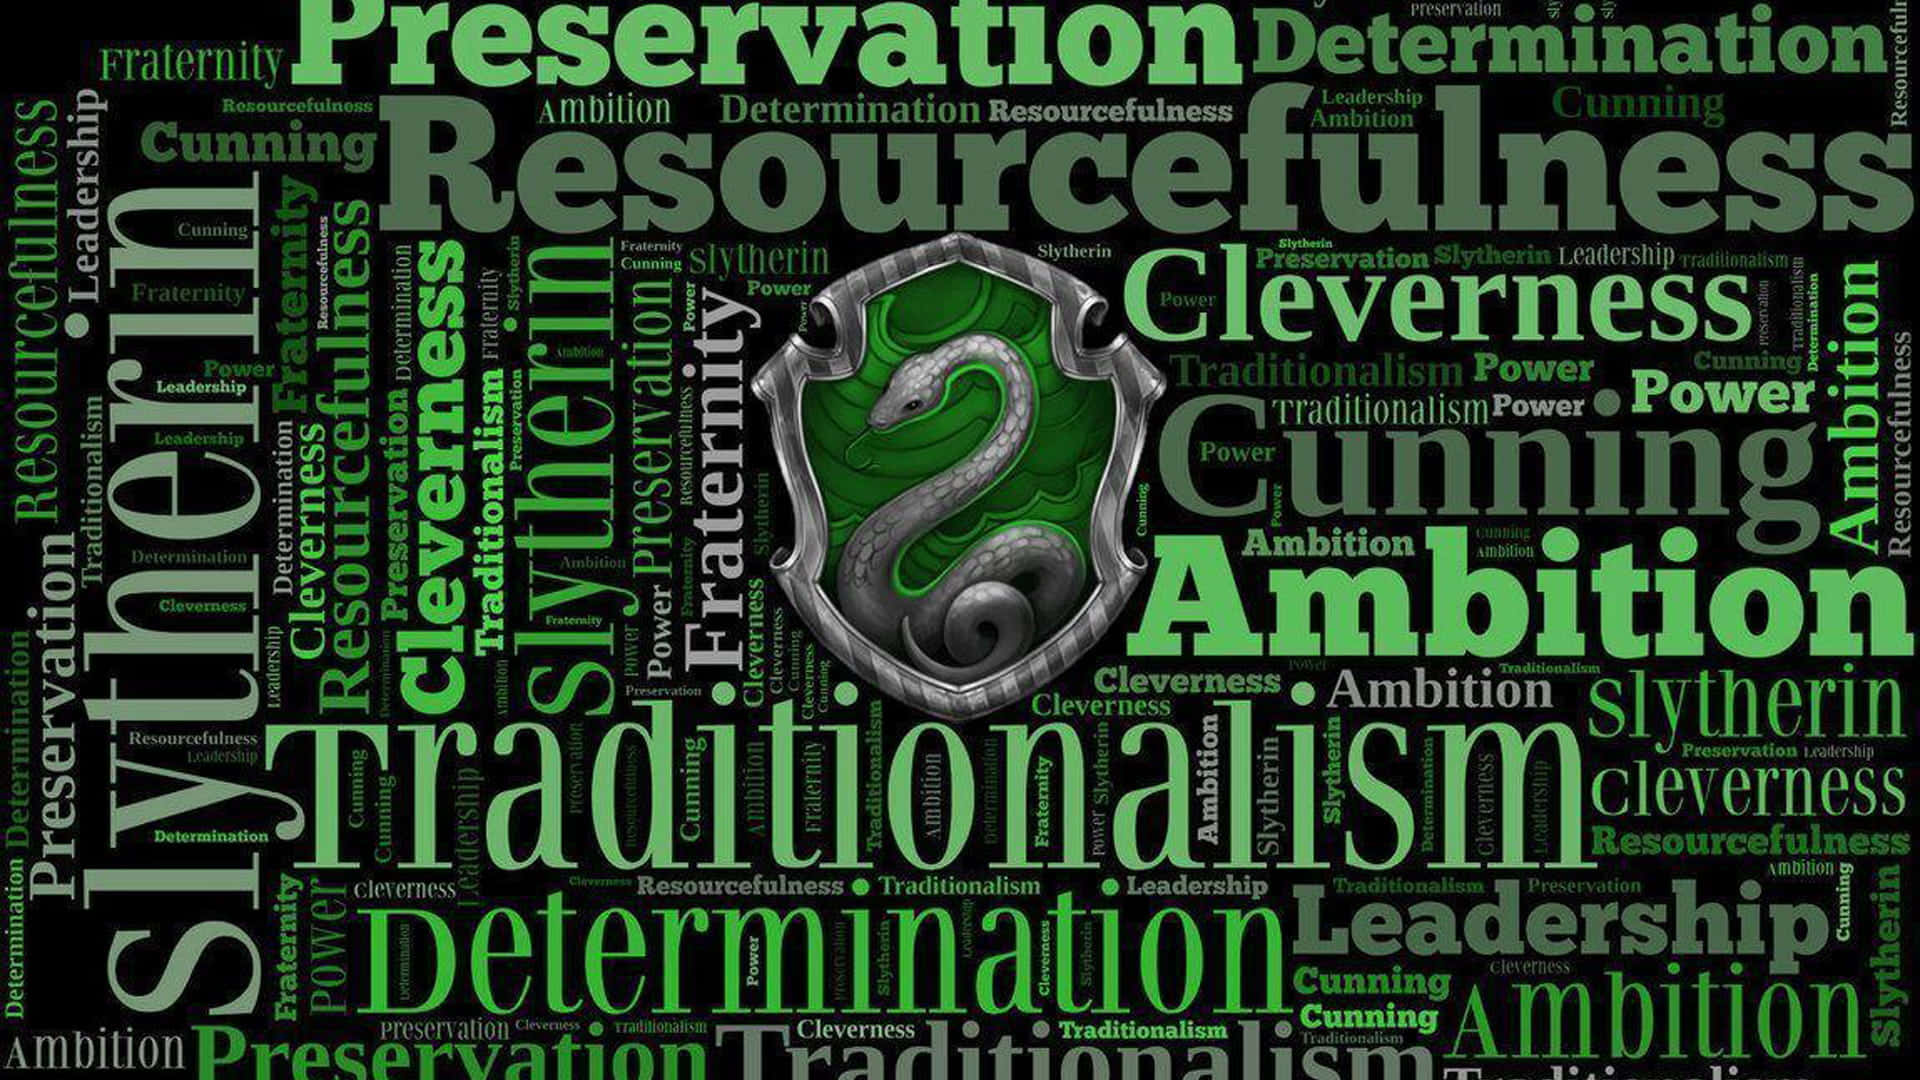 Welcome to the House of Slytherin